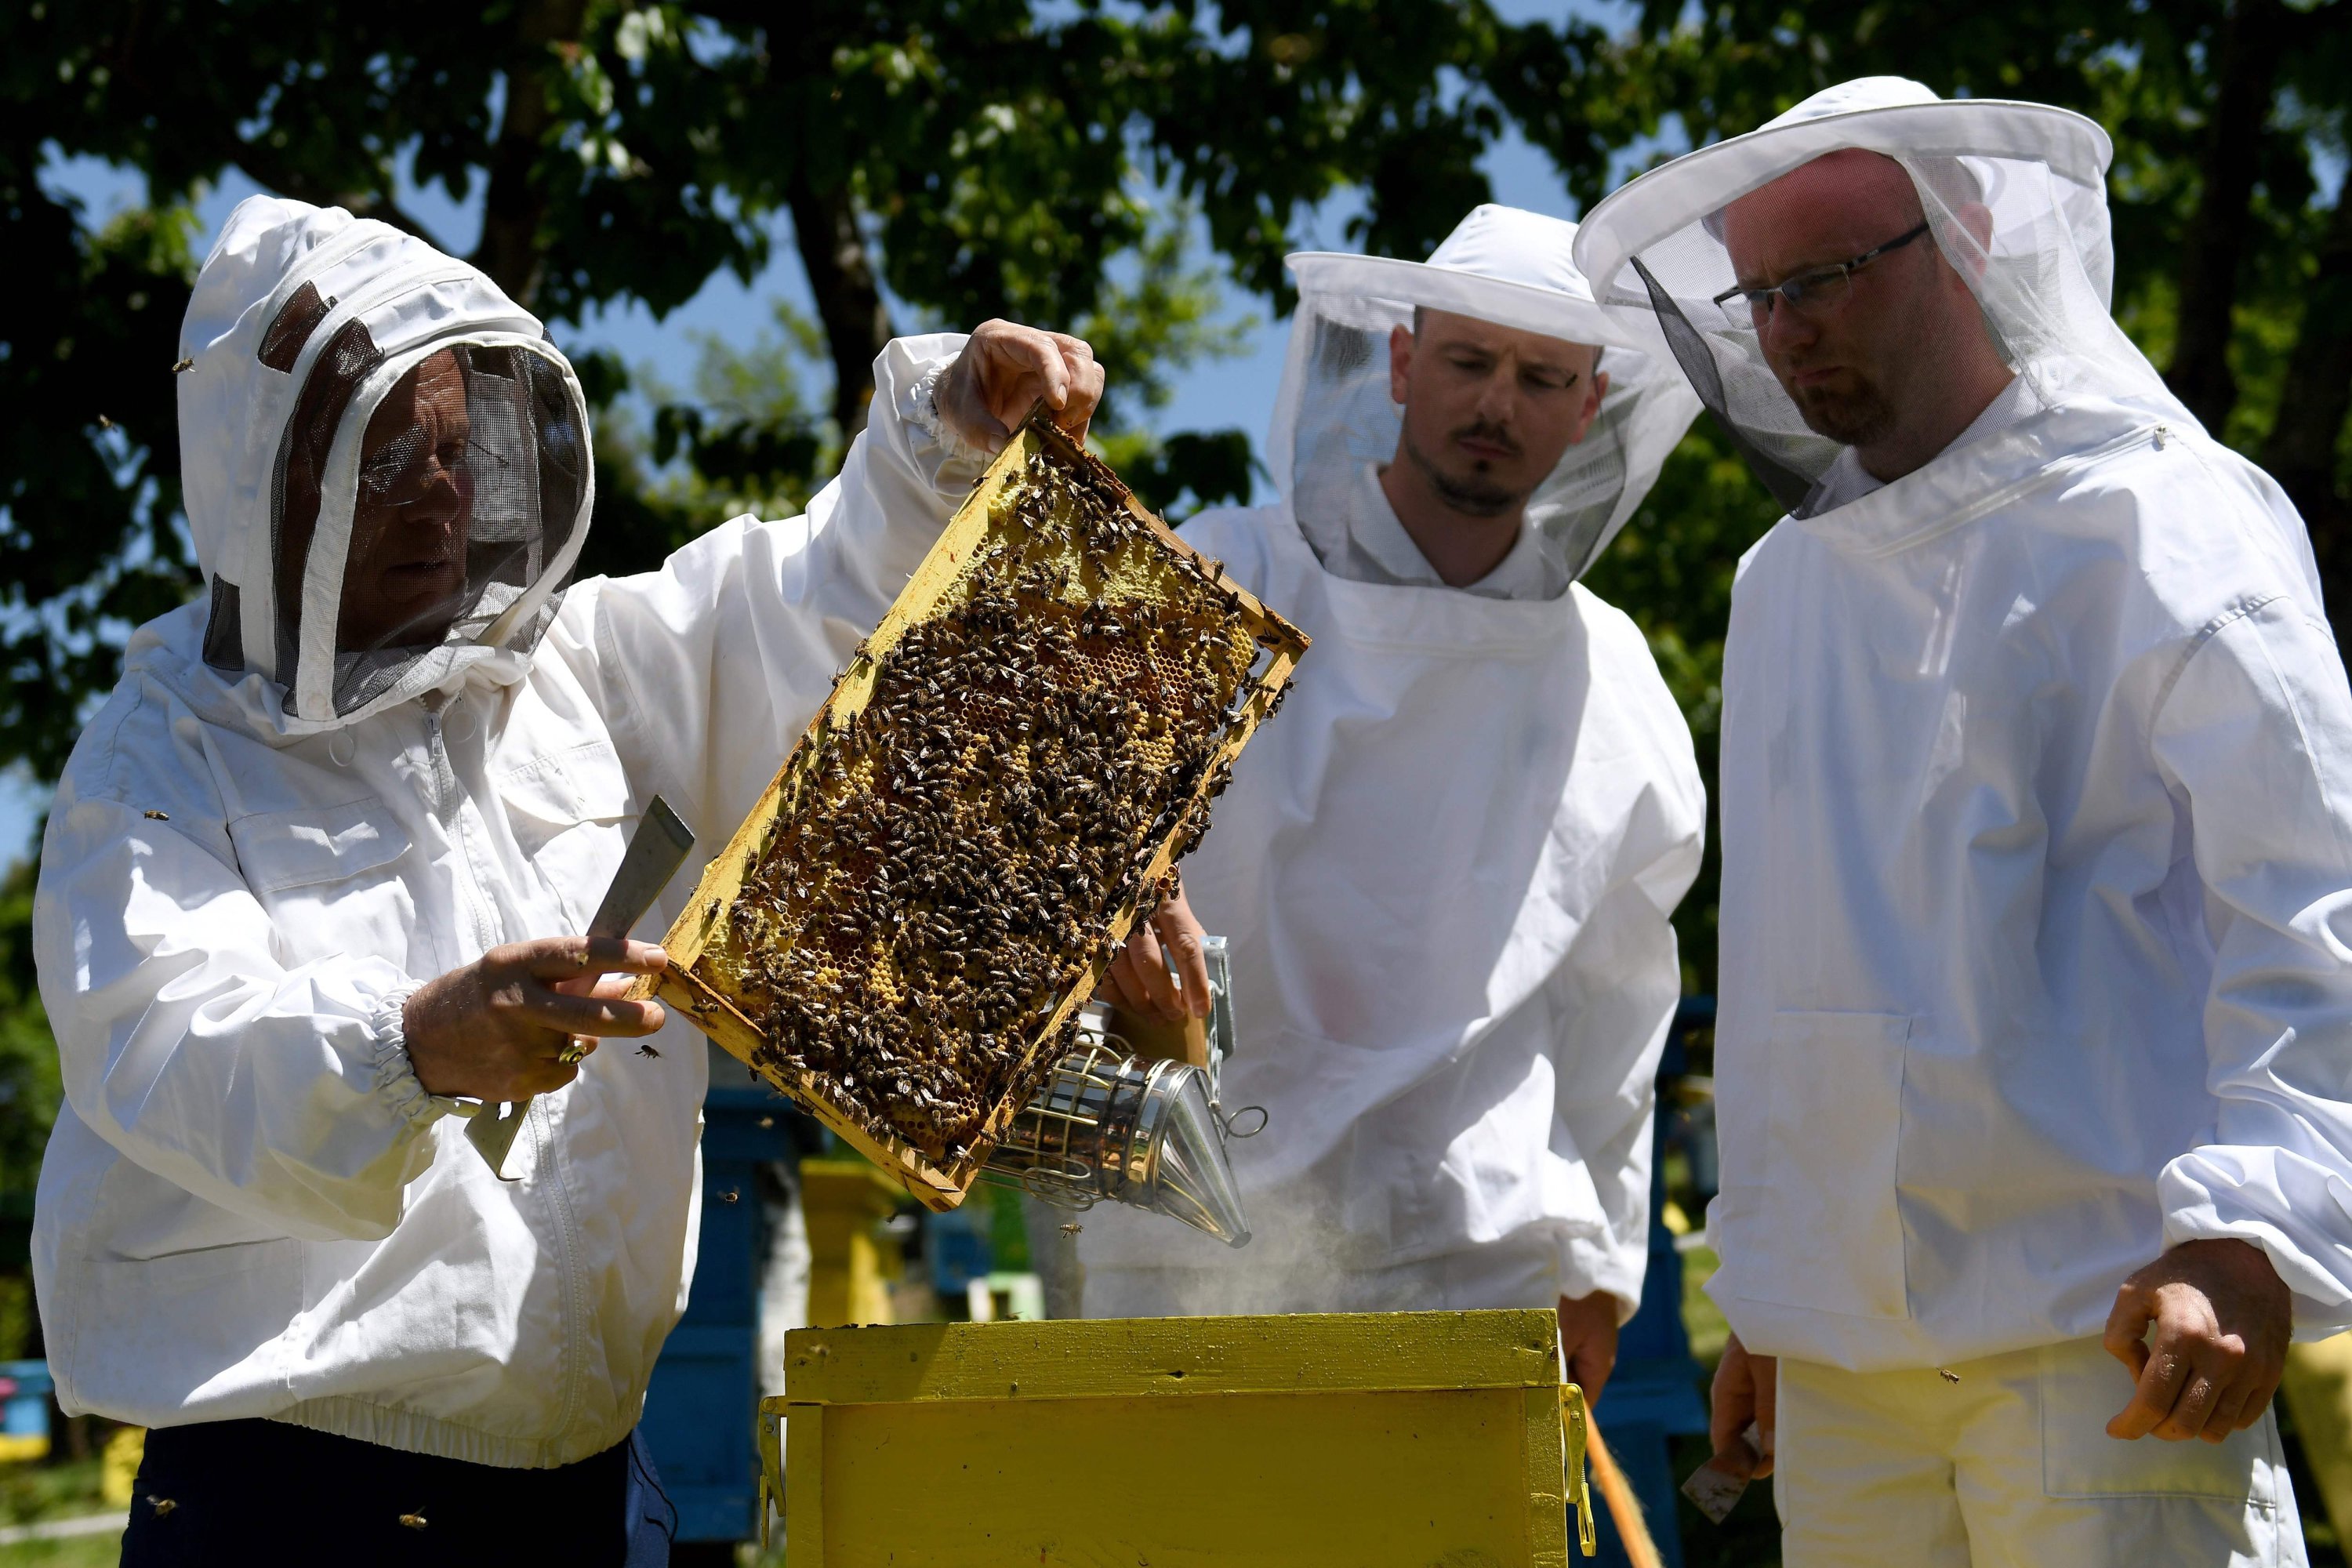 Busy bees: Lockdown gives Albanian beekeepers a 'golden year